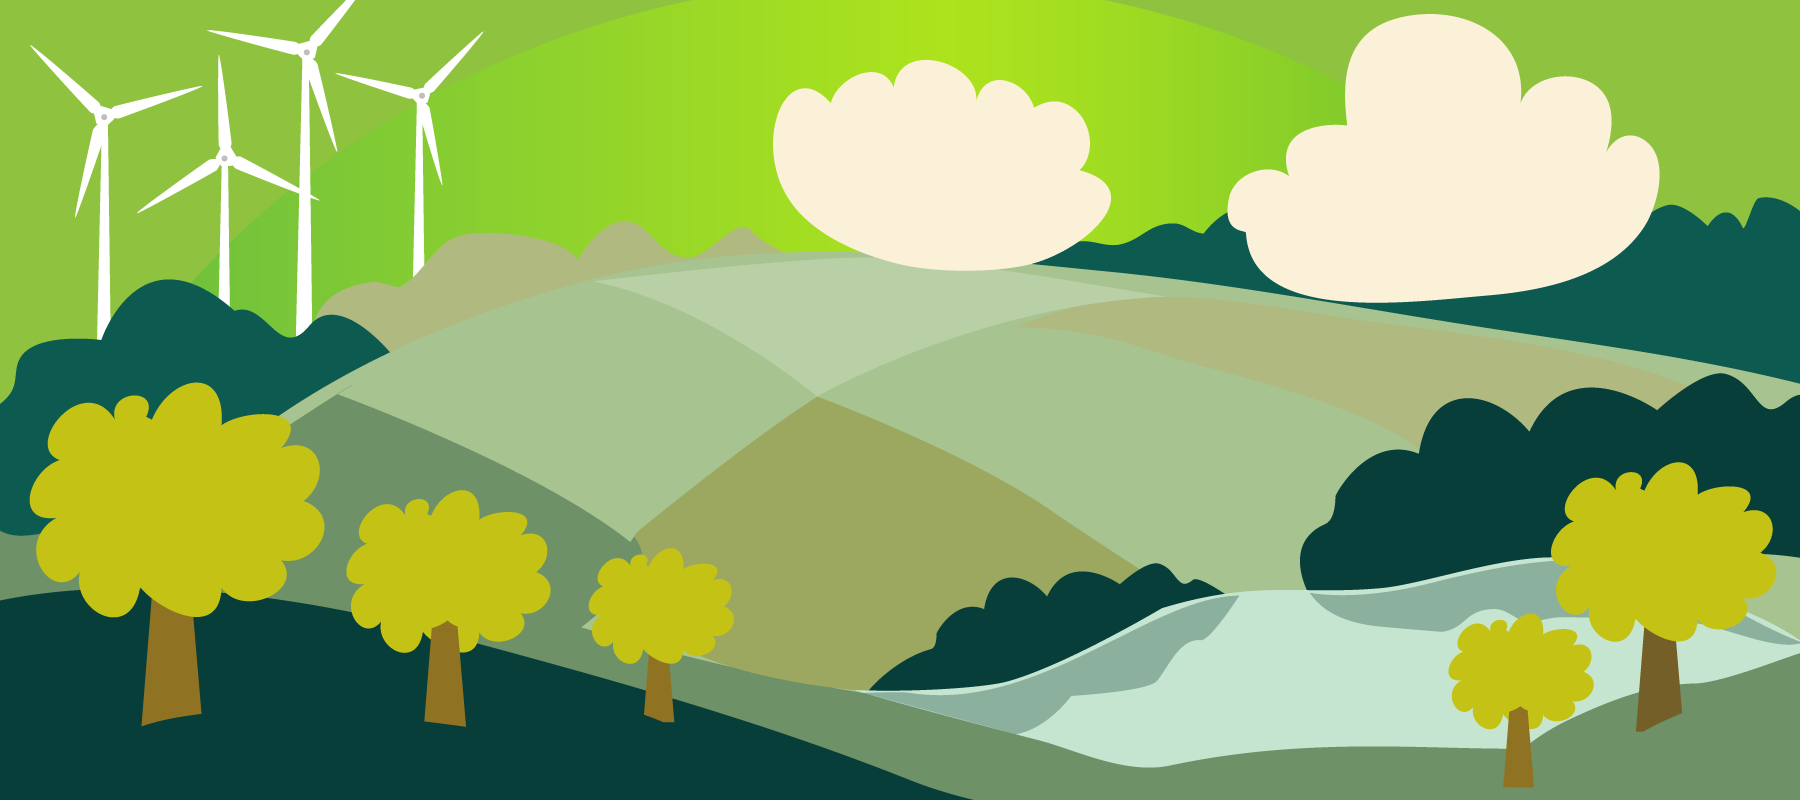 Illustration: Green fields, trees and a picturesque stream with wind turbines in the background